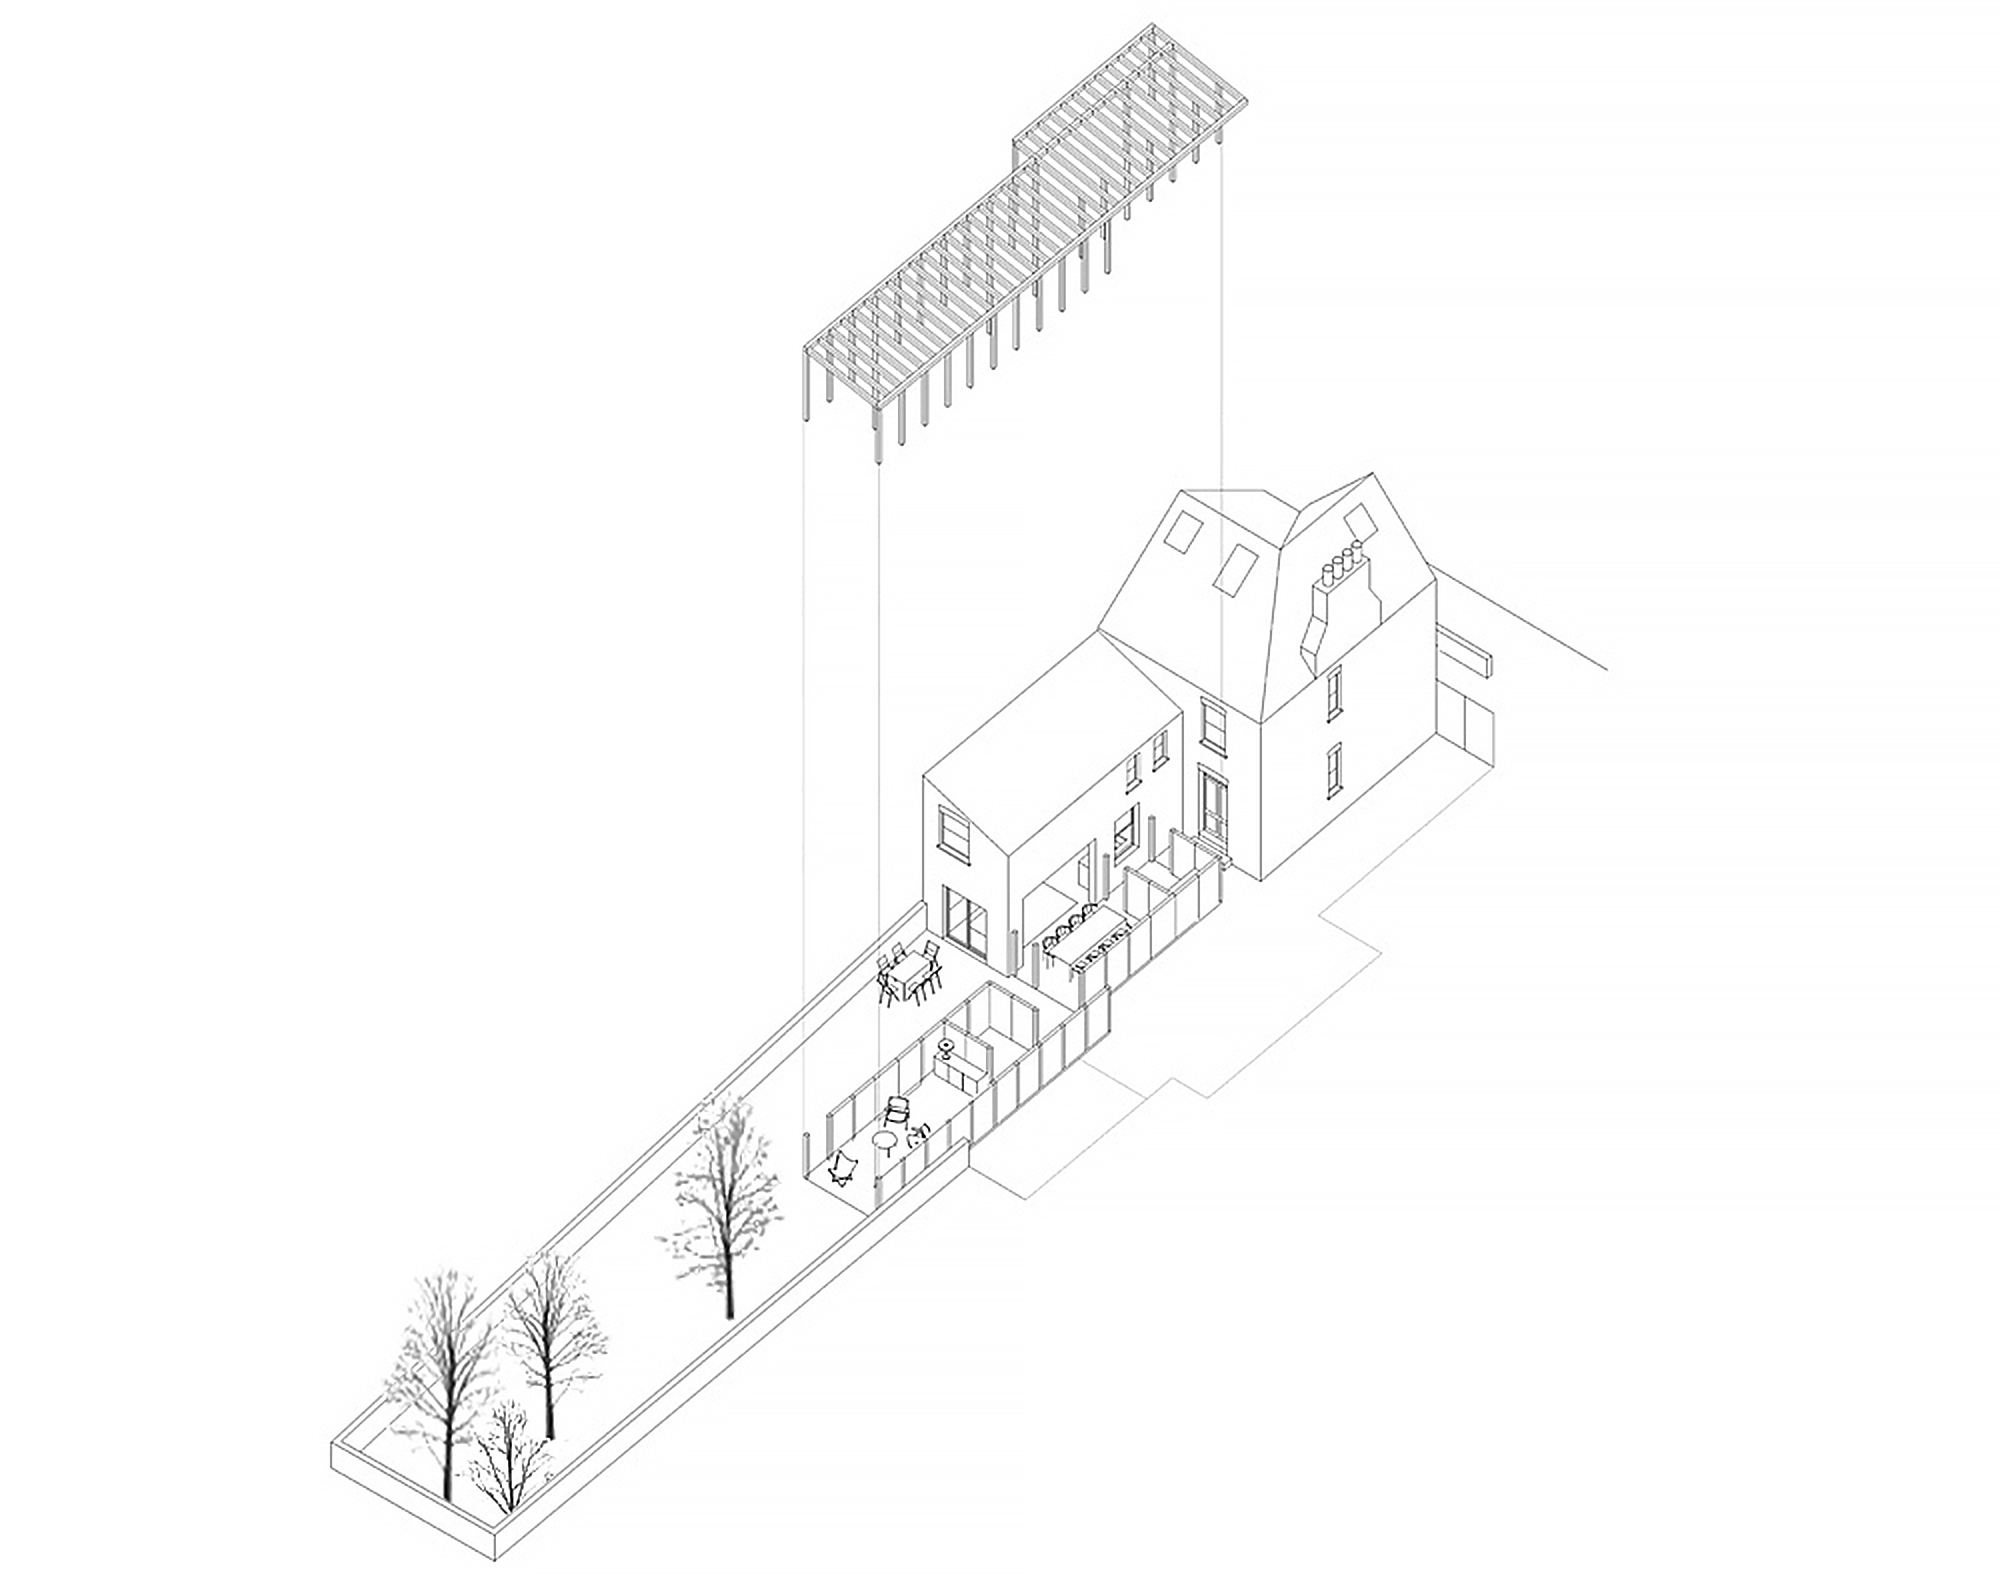 Erbar Mattes Architects Glisson Road Cambridge timber frame extension model